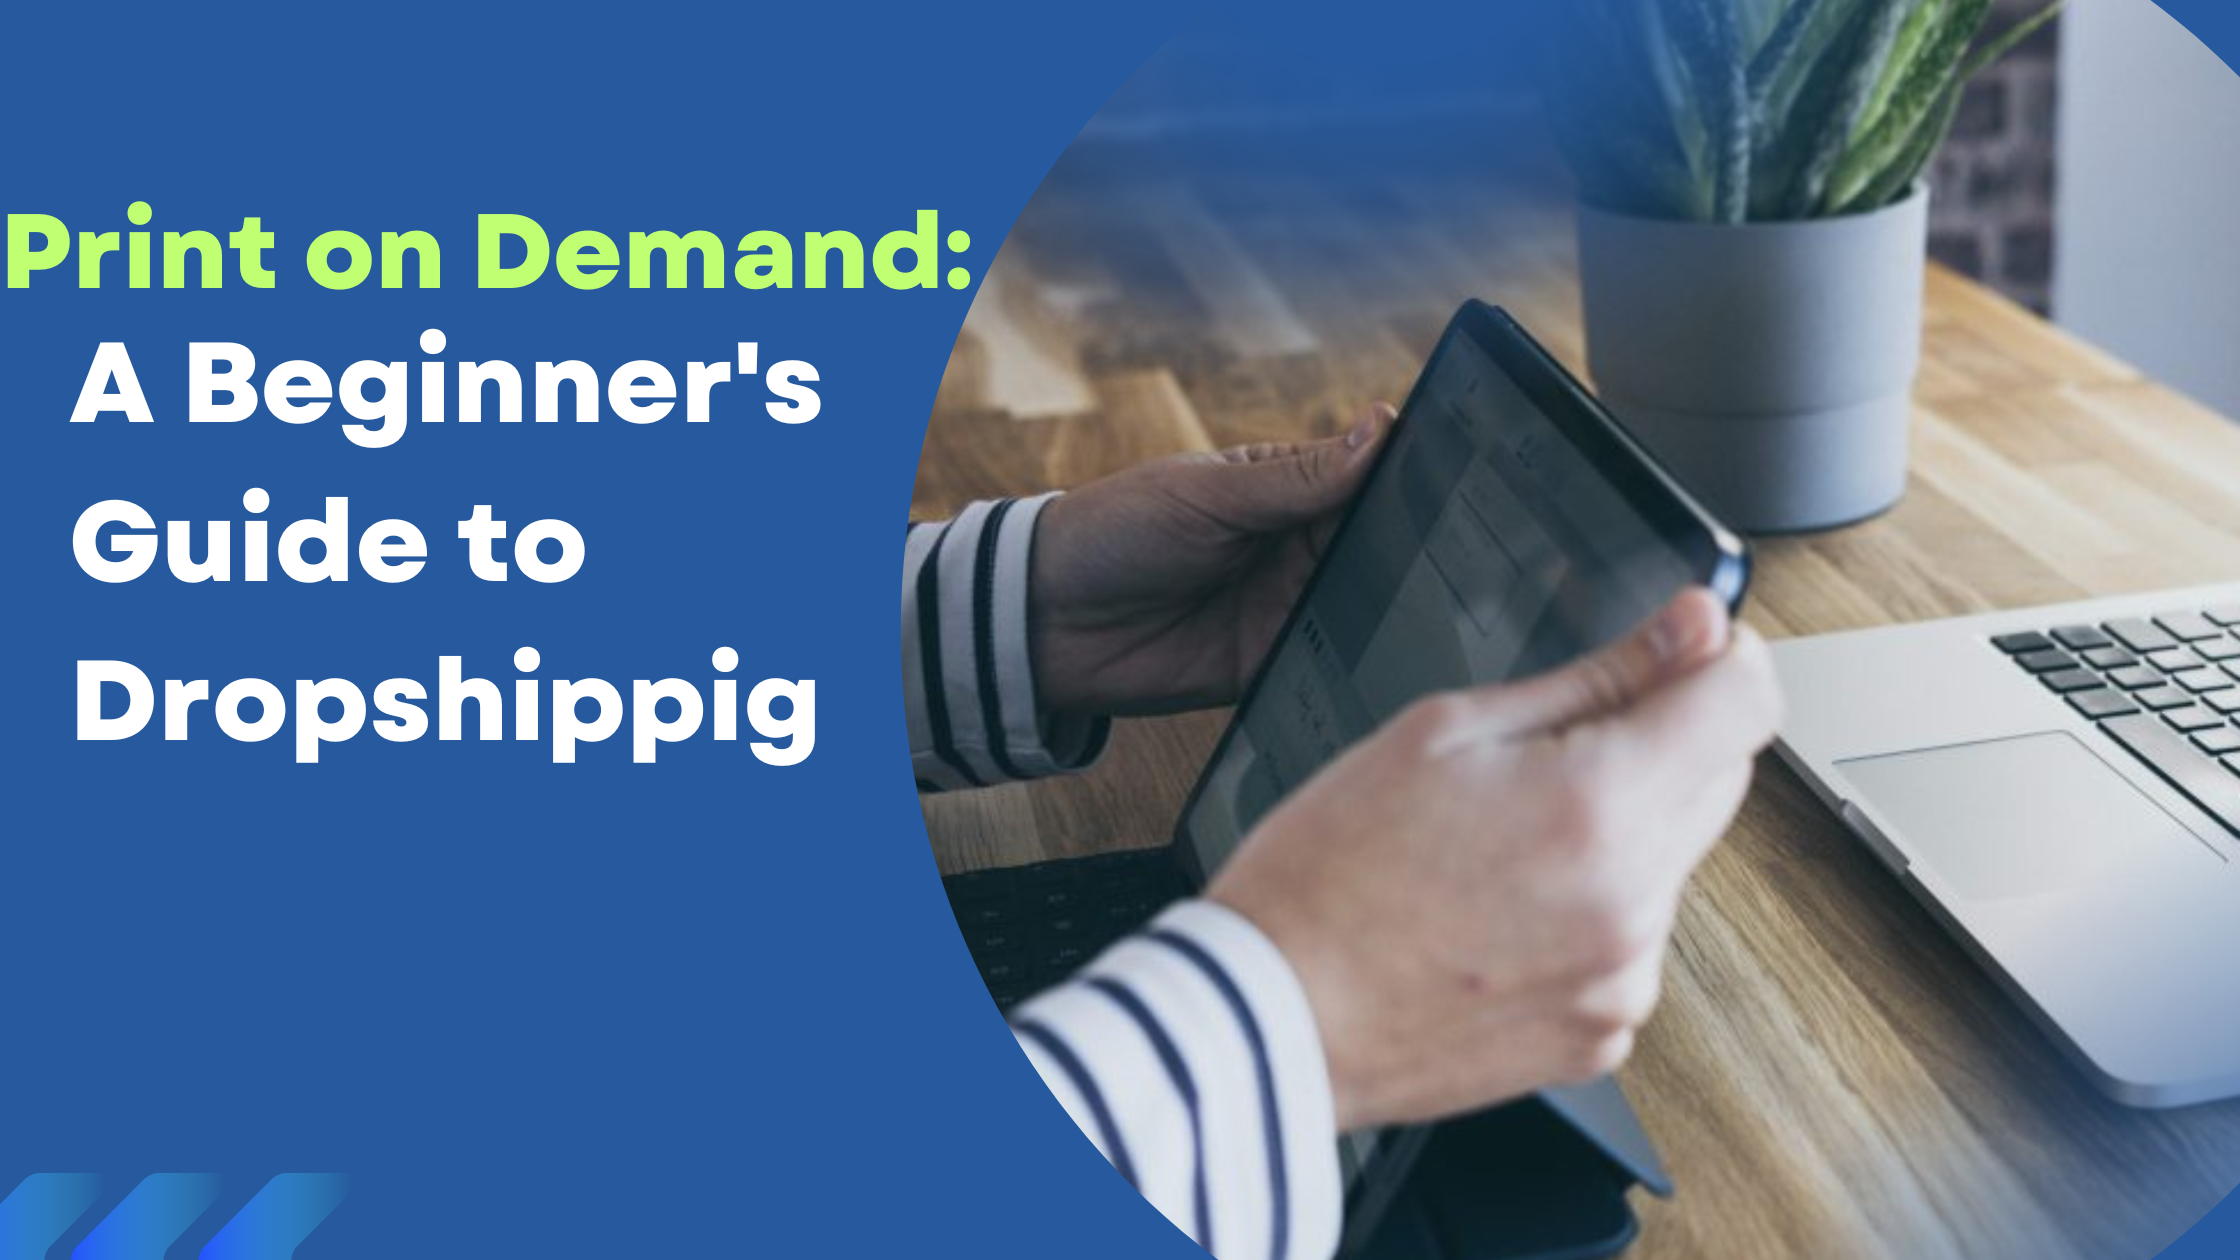 Print on Demand: A Beginner's Guide to Dropshipping